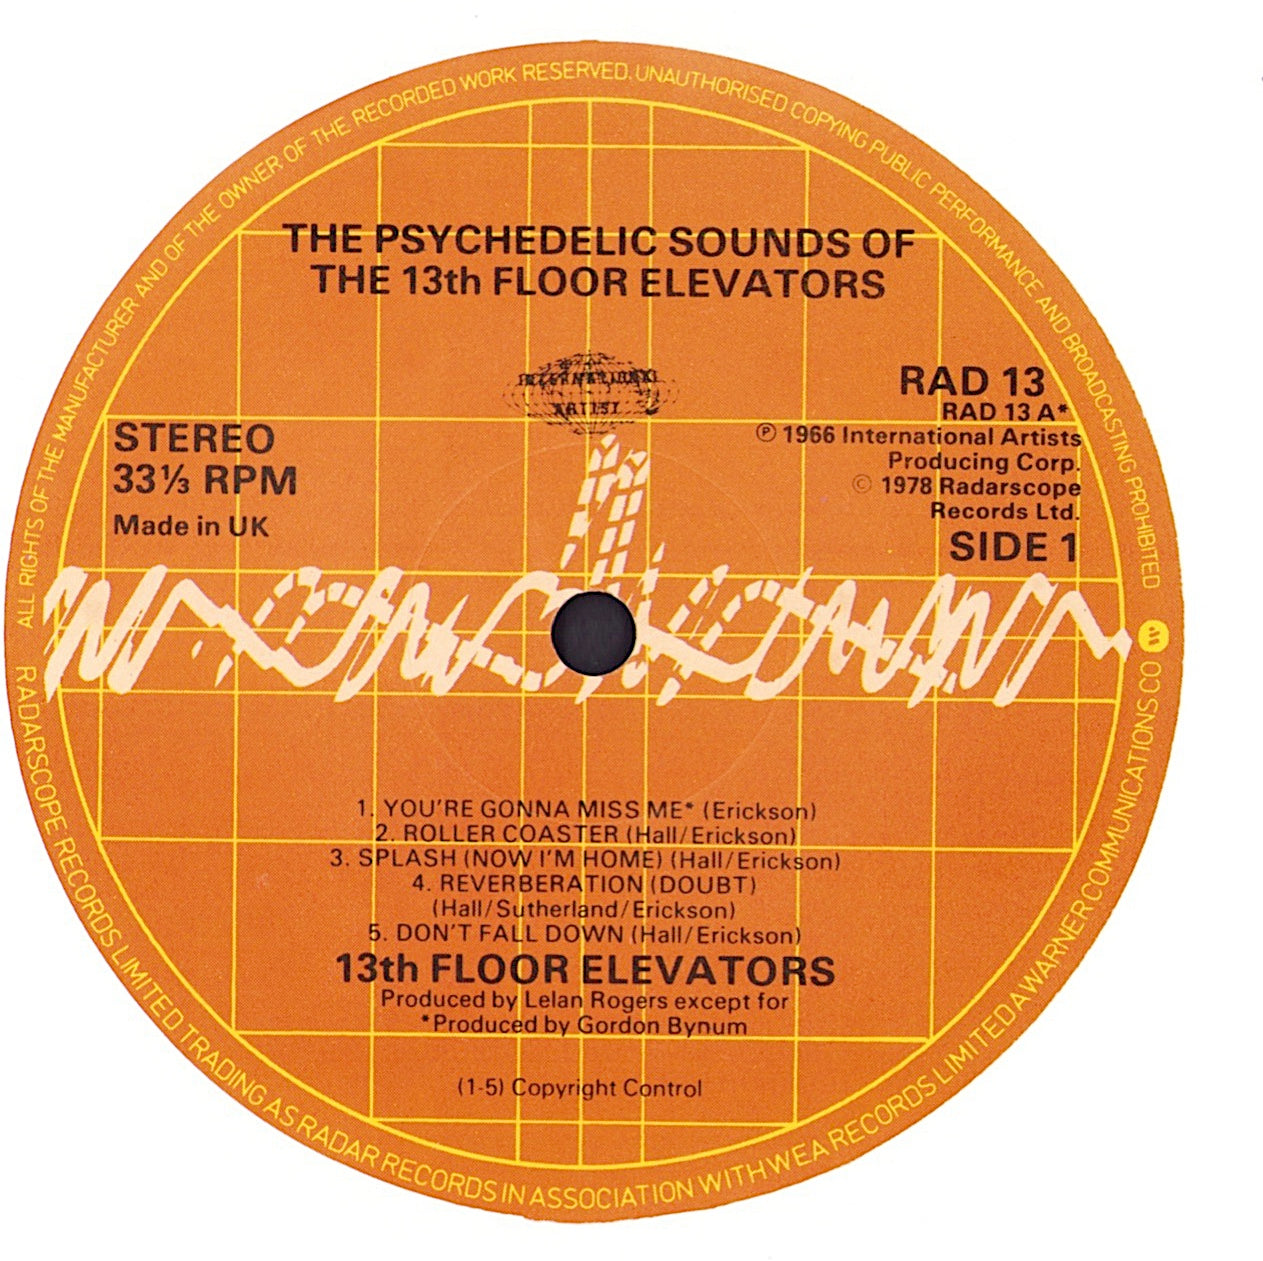 The 13th Floor Elevators - The Psychedelic Sounds Of The 13th Floor Elevators Vinyl LP